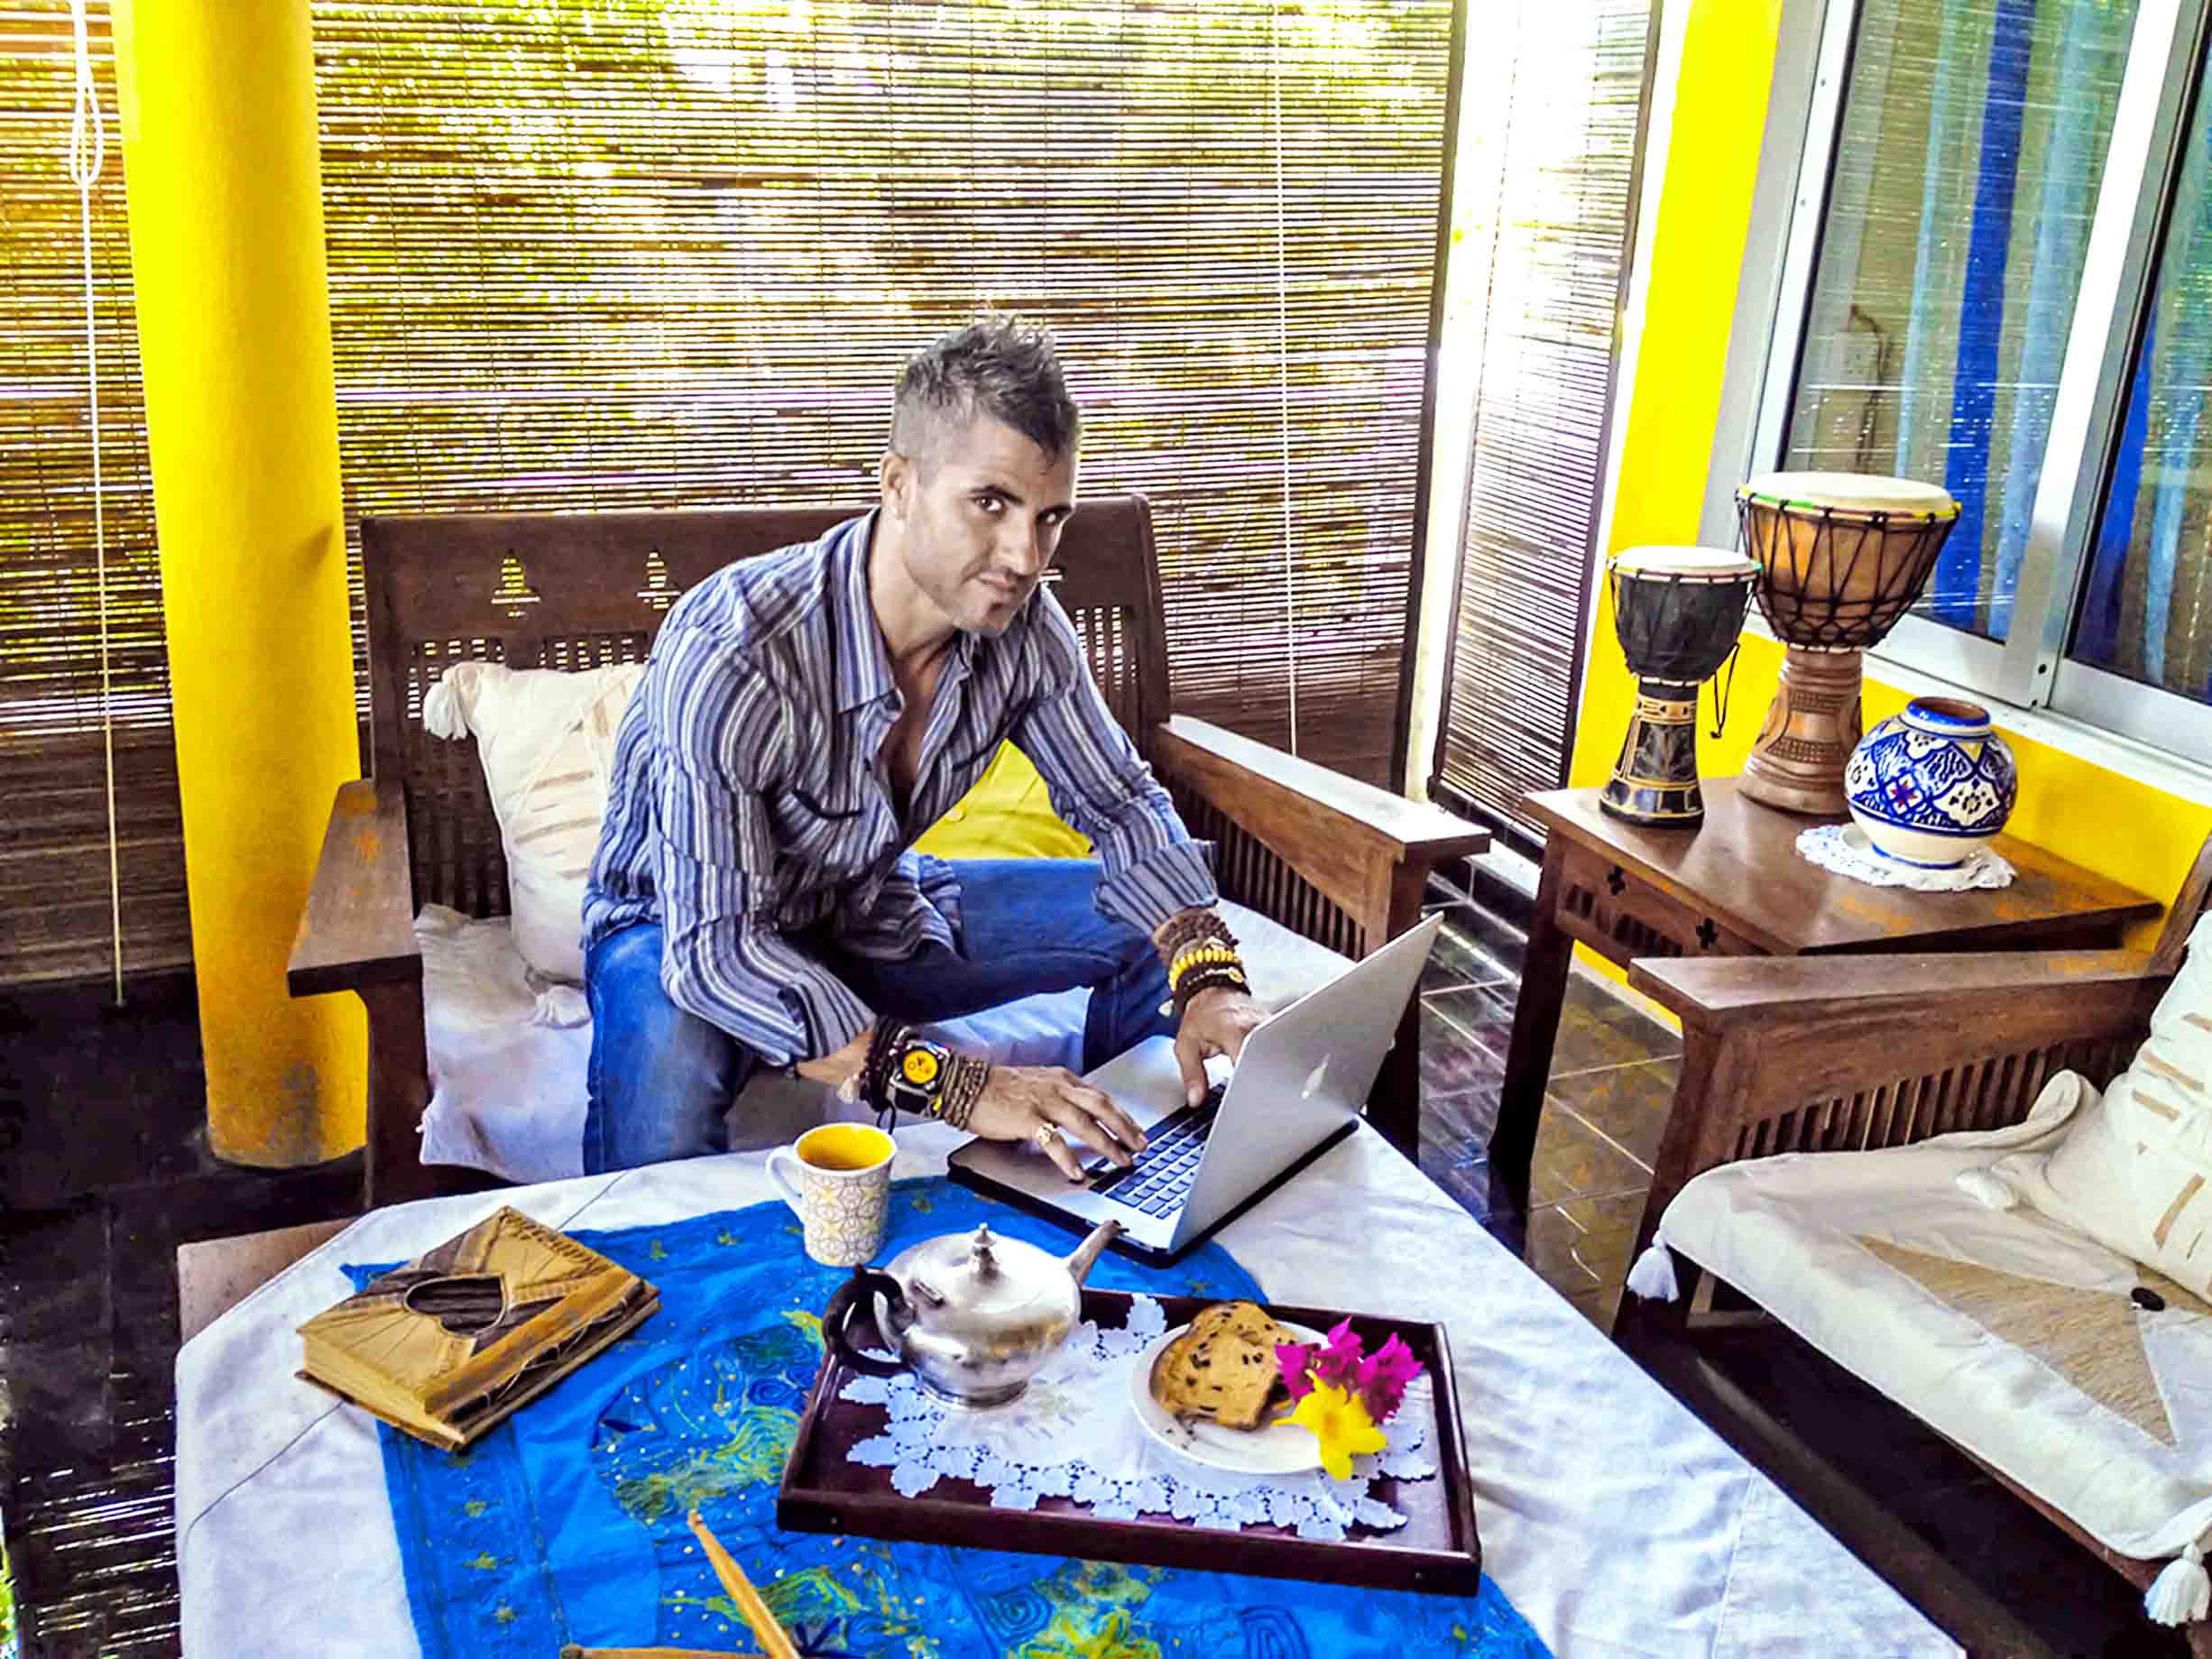 Om Lombard : After Modelling, Bio Baking, Real Estate, 2013 will turn me Writer! Defi Quotidien – 01/2013 MAURITIUS